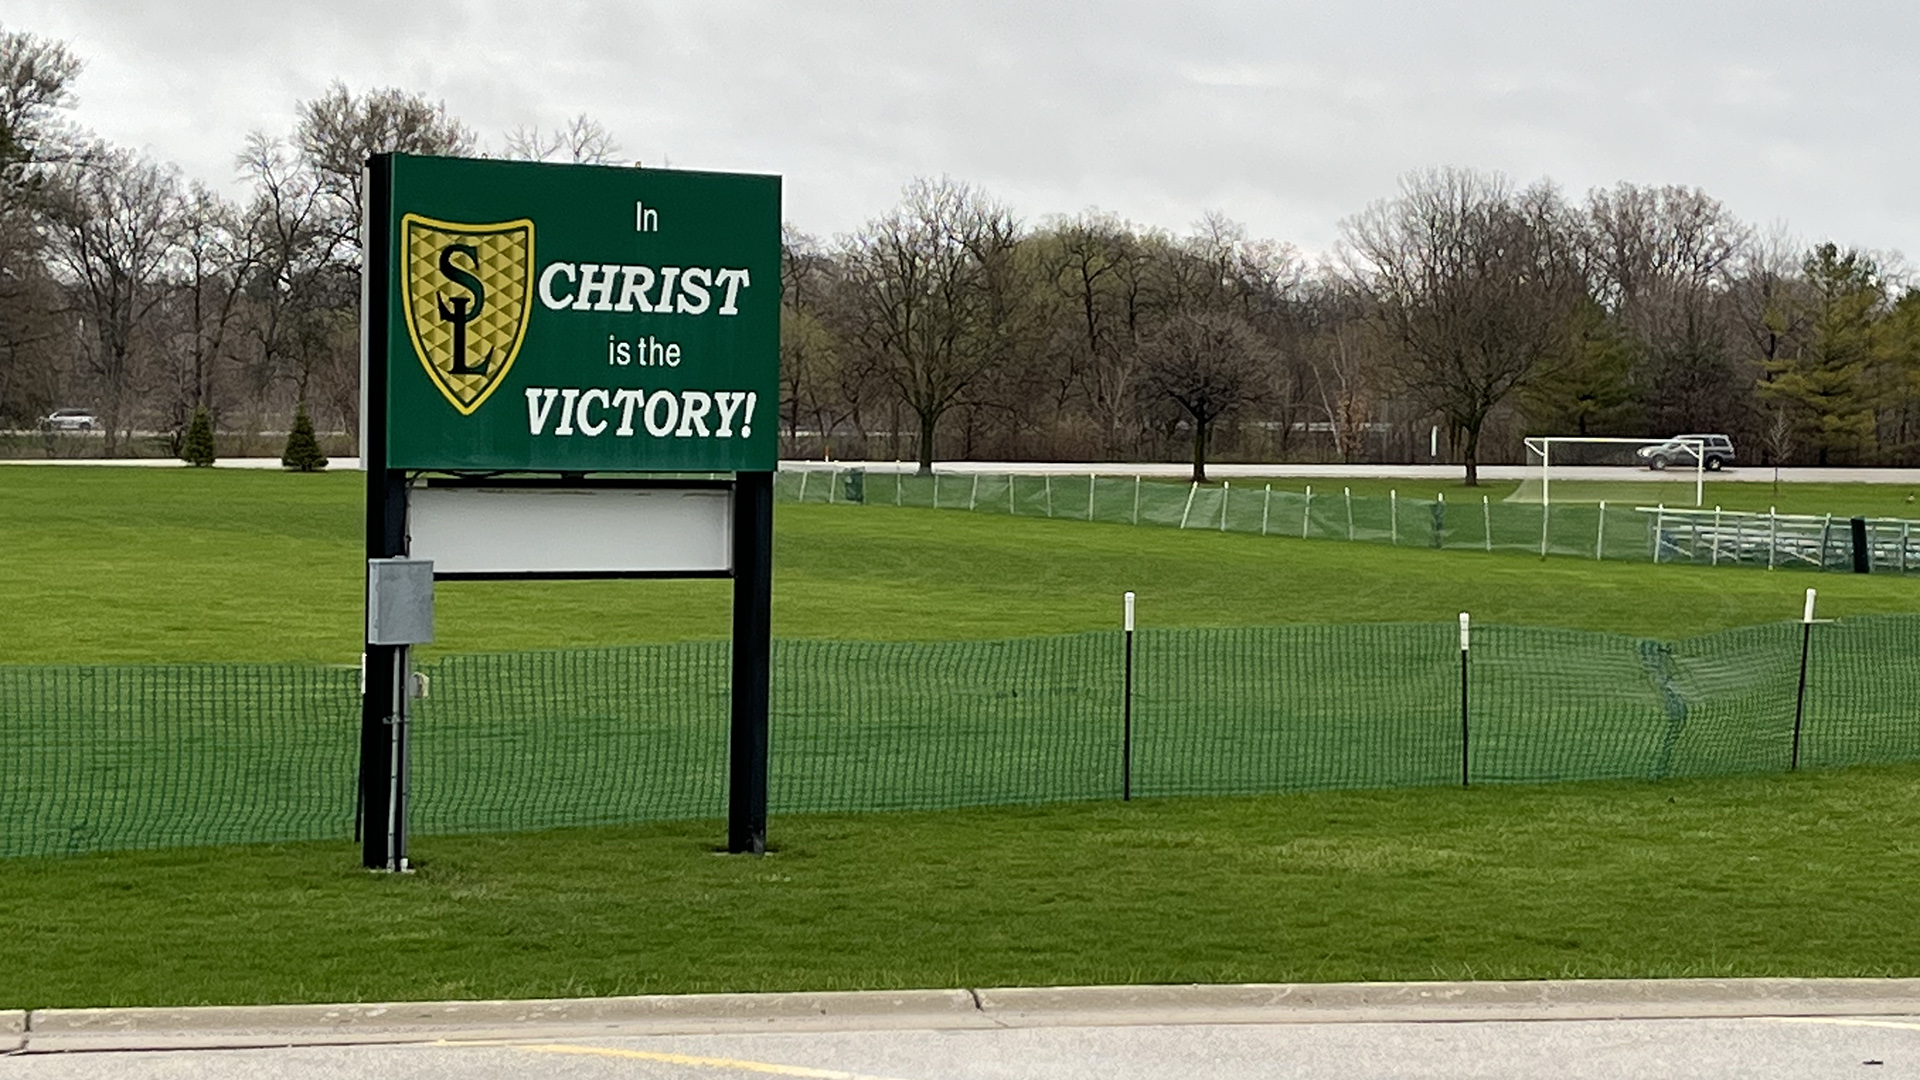 A sign showing a shield logo with the letters "S" and "L" and the words "In Christ Is the Victory!" stands in a lawn surrounded by snow fencing, with a road and line of trees in the background.